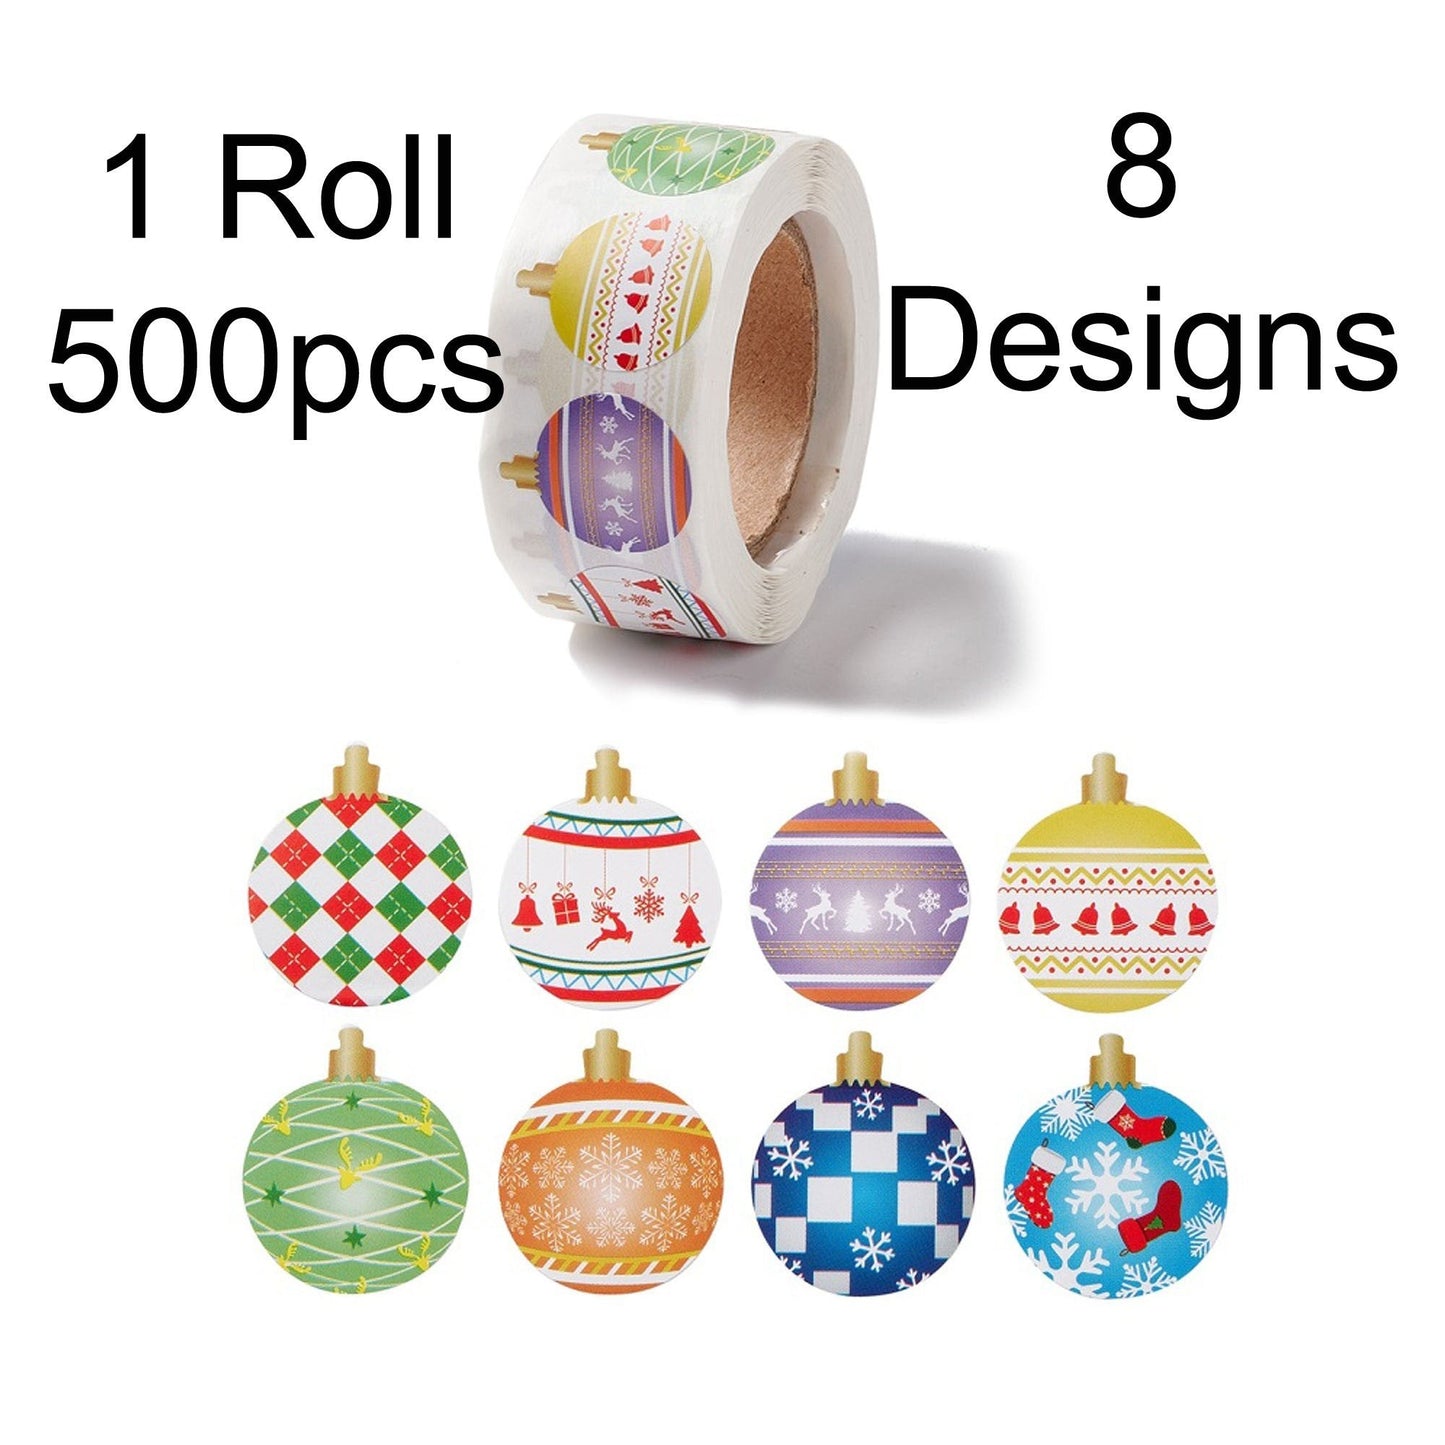 1 Roll 500pcs Christmas Bauble Round Self Adhesive Paper Stickers 25mm